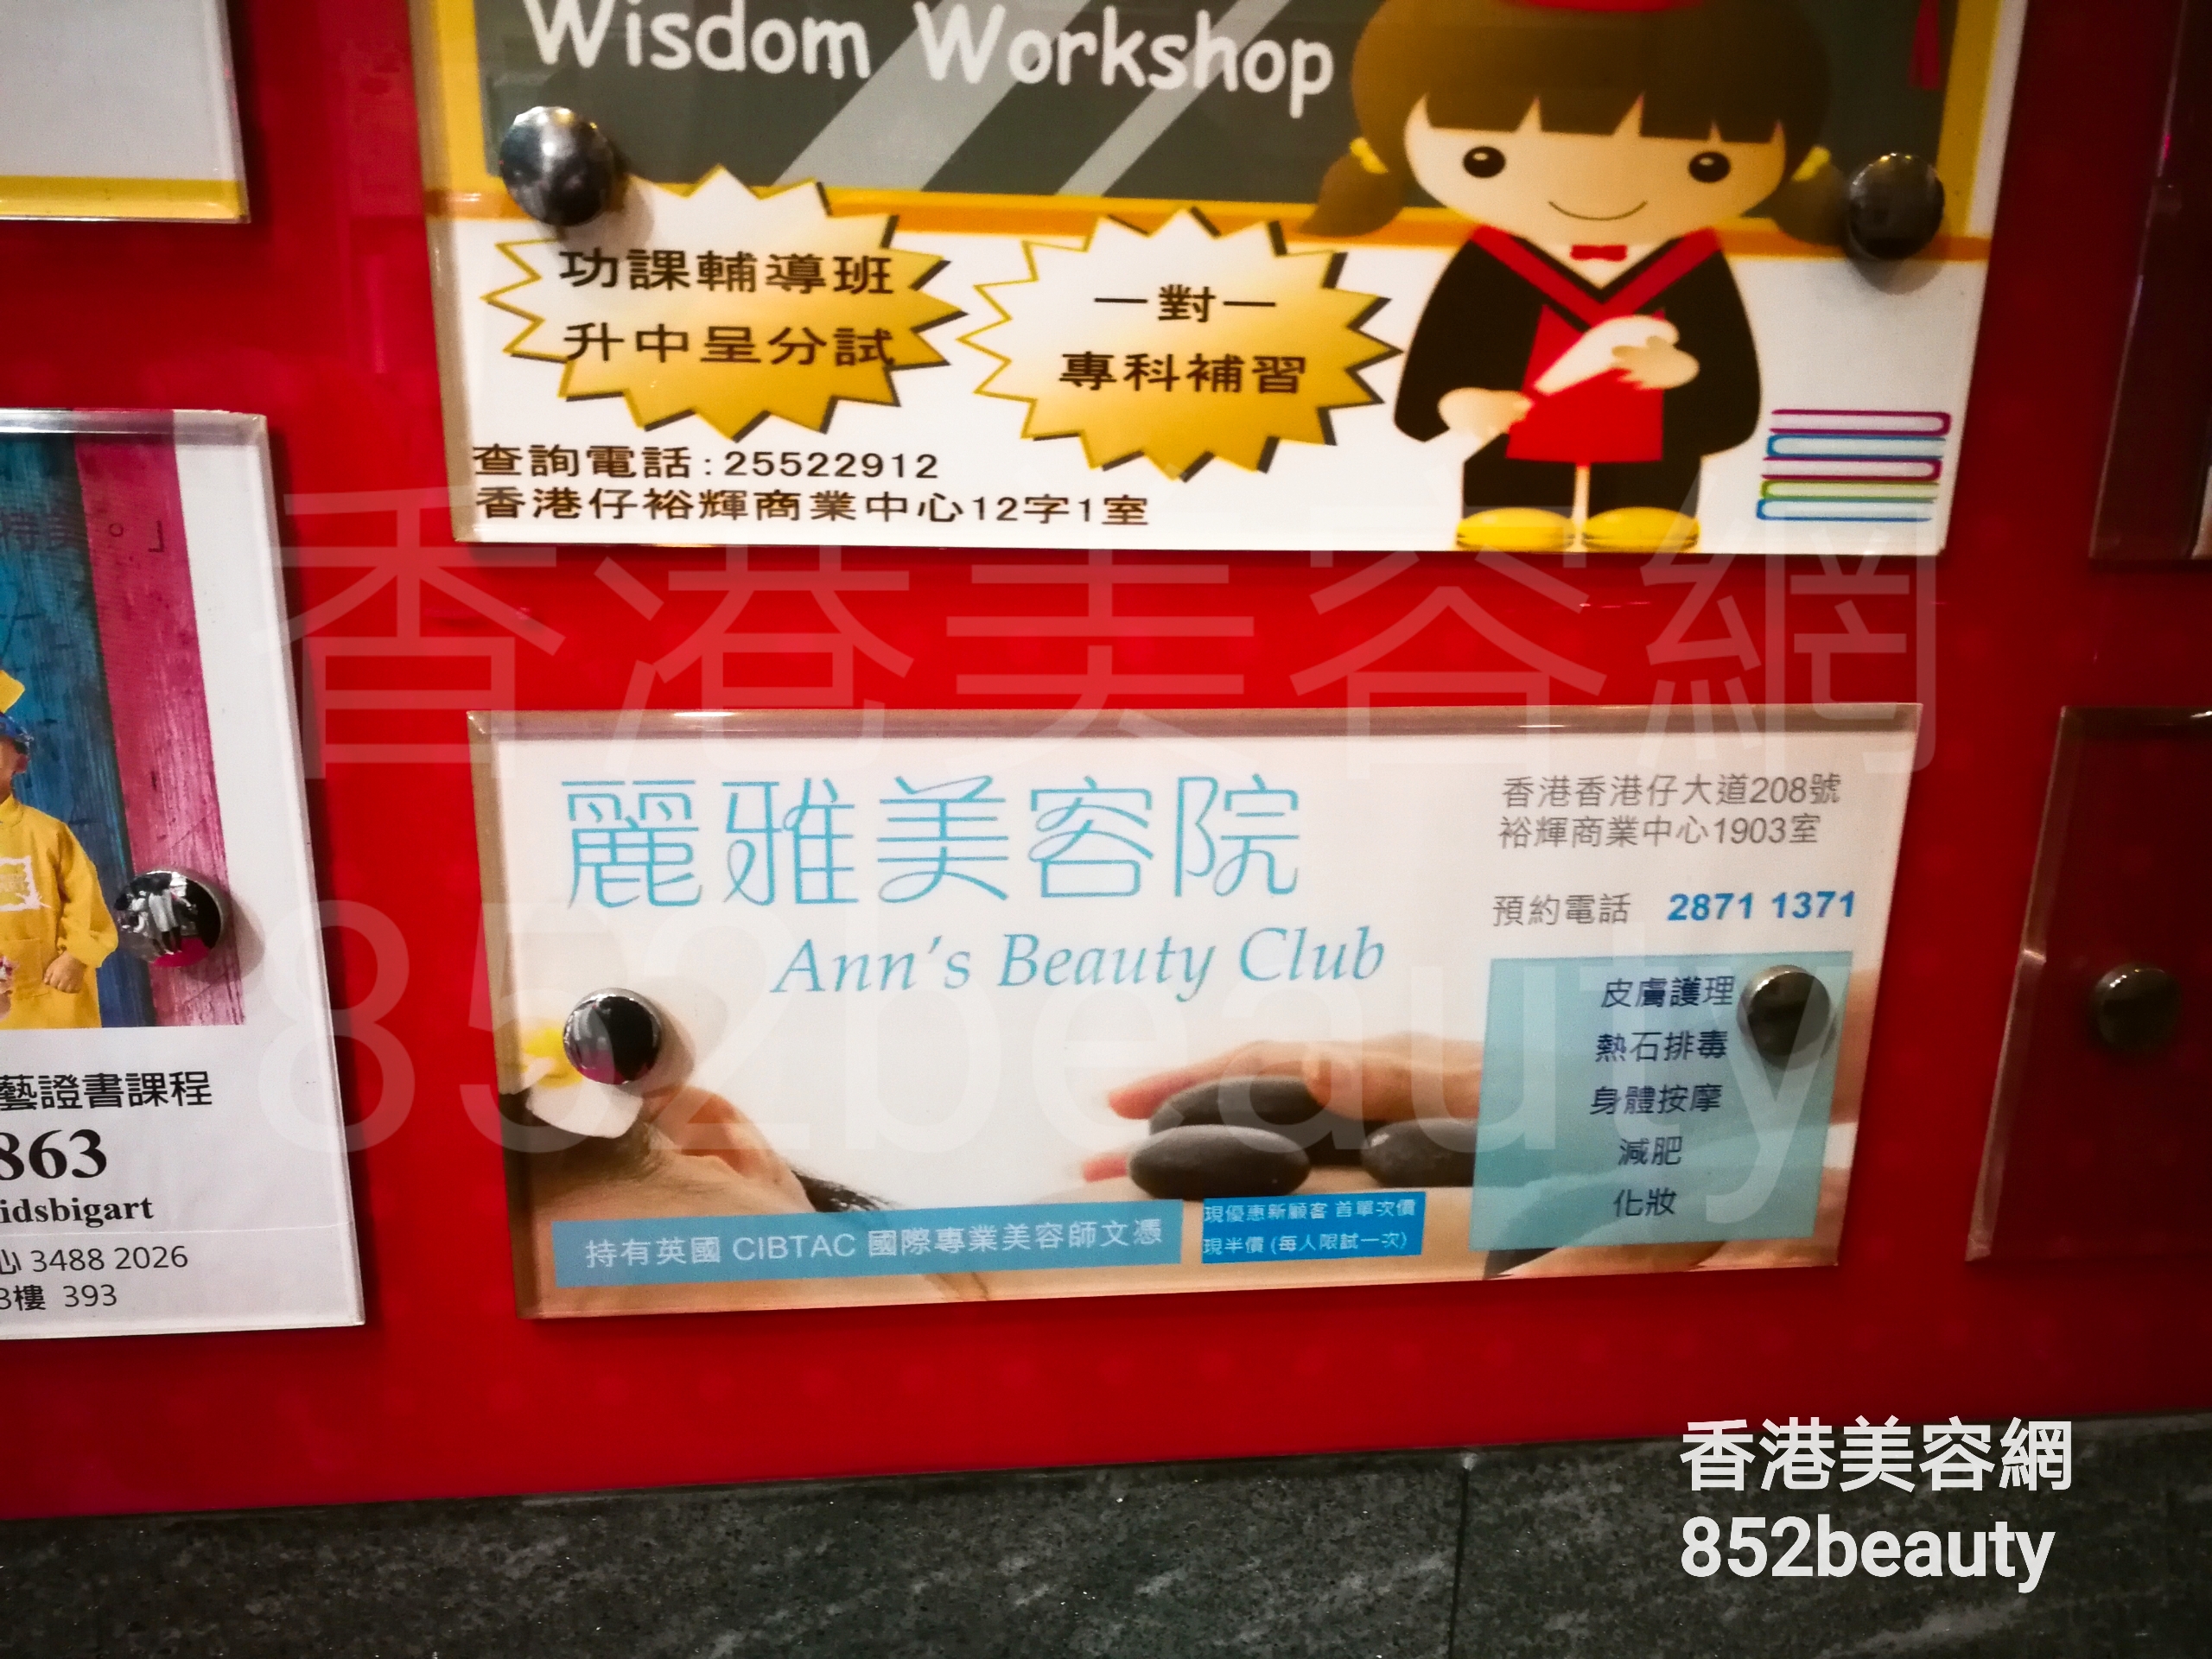 Hand and foot care: 麗雅美容院